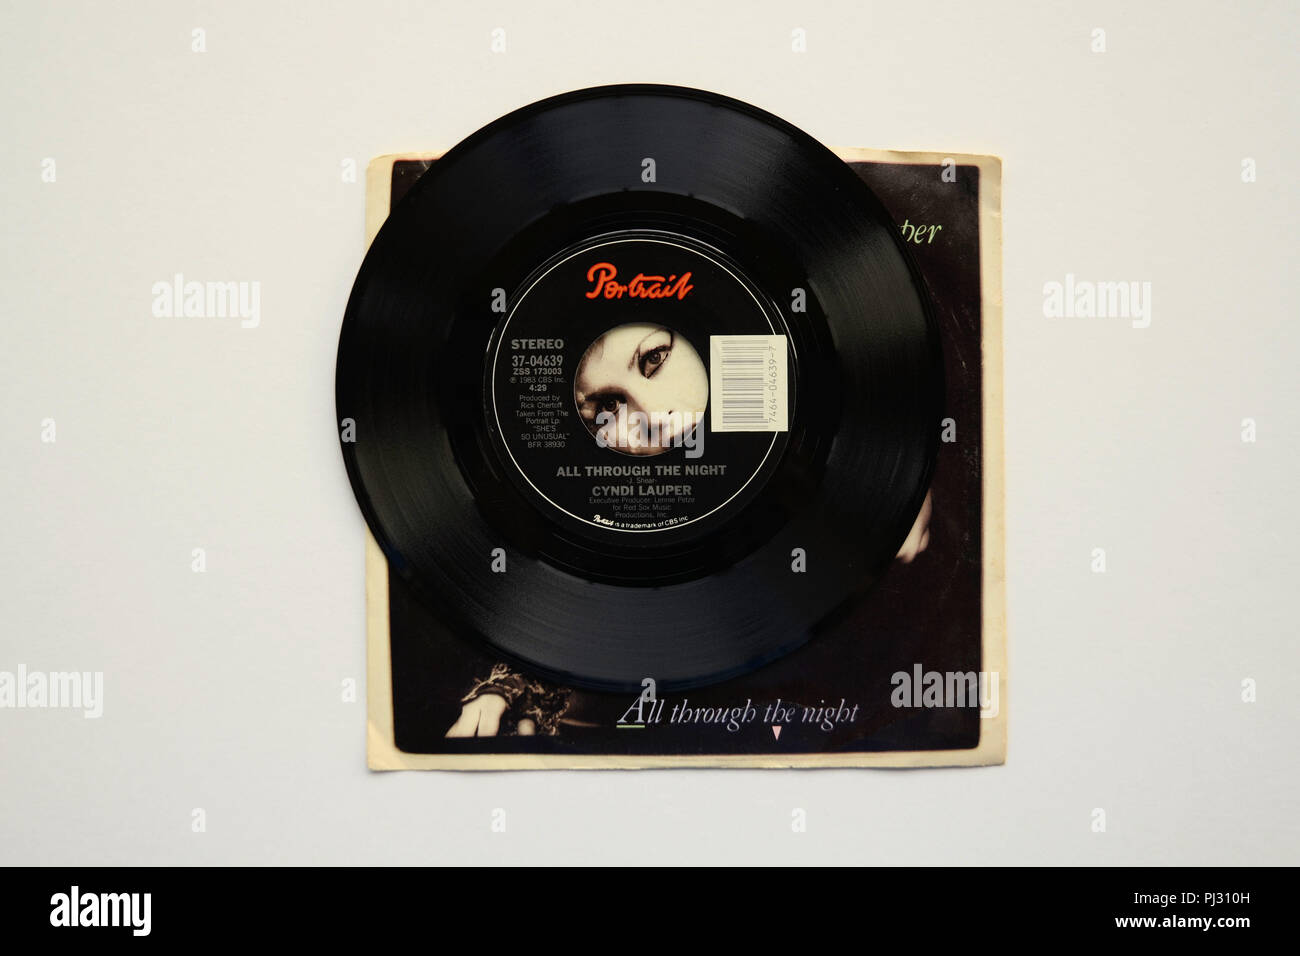 Sleeve and 45 RPM vinyl record of Cyndi Lauper's song 'All Through The Night' released in 1983 by Portrait Records. Stock Photo